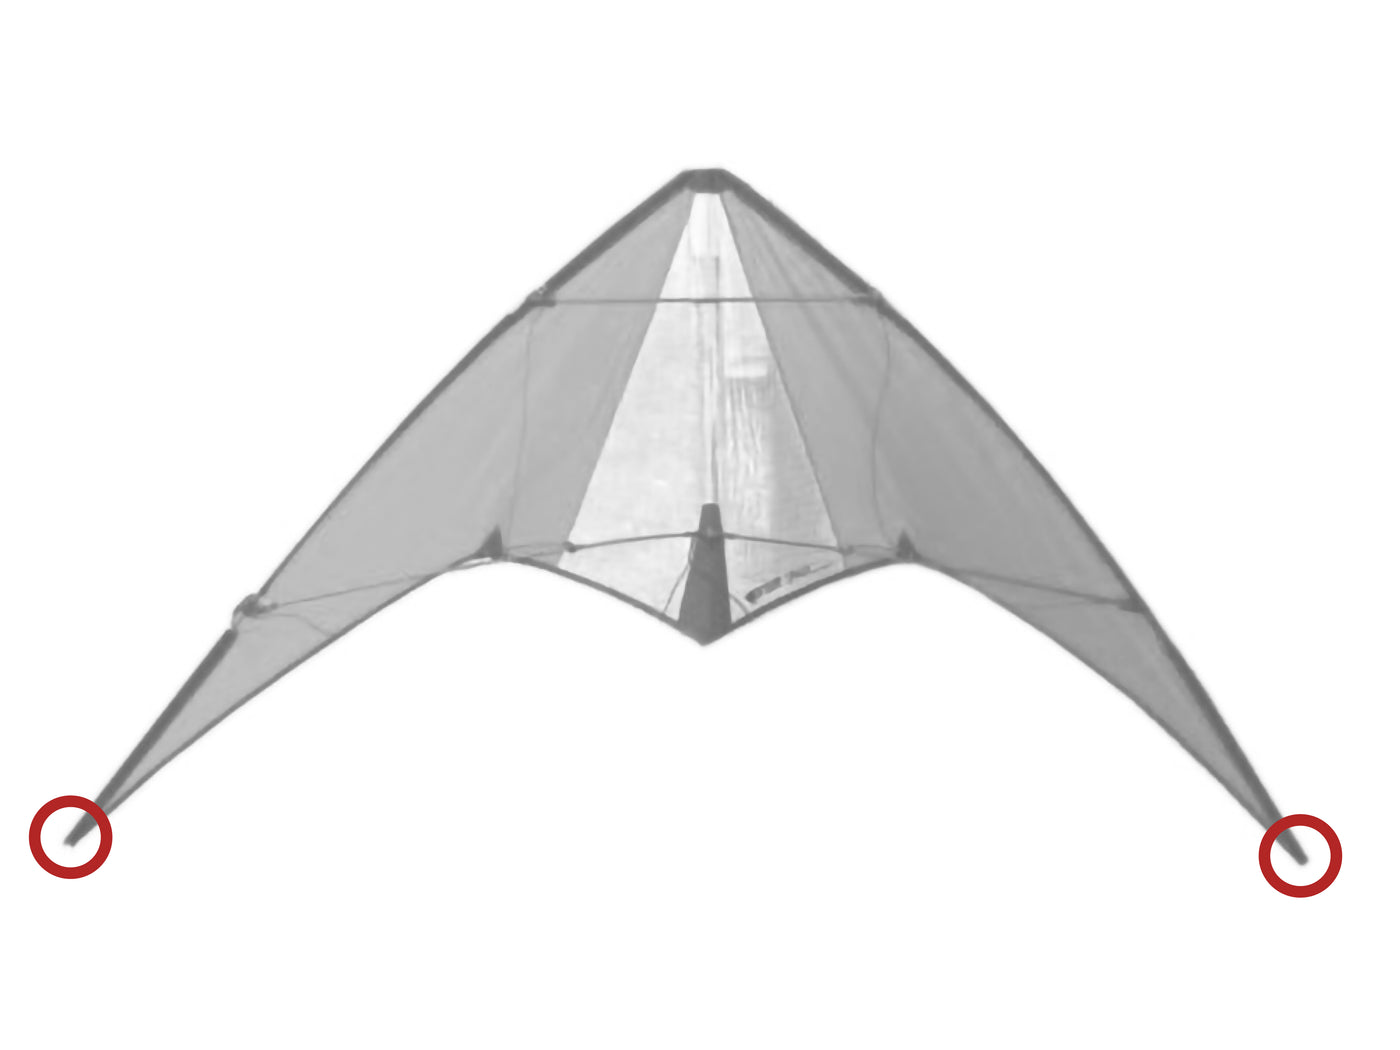 Diagram showing location of the Spark (Carbon) Wingtip Nocks on the kite.